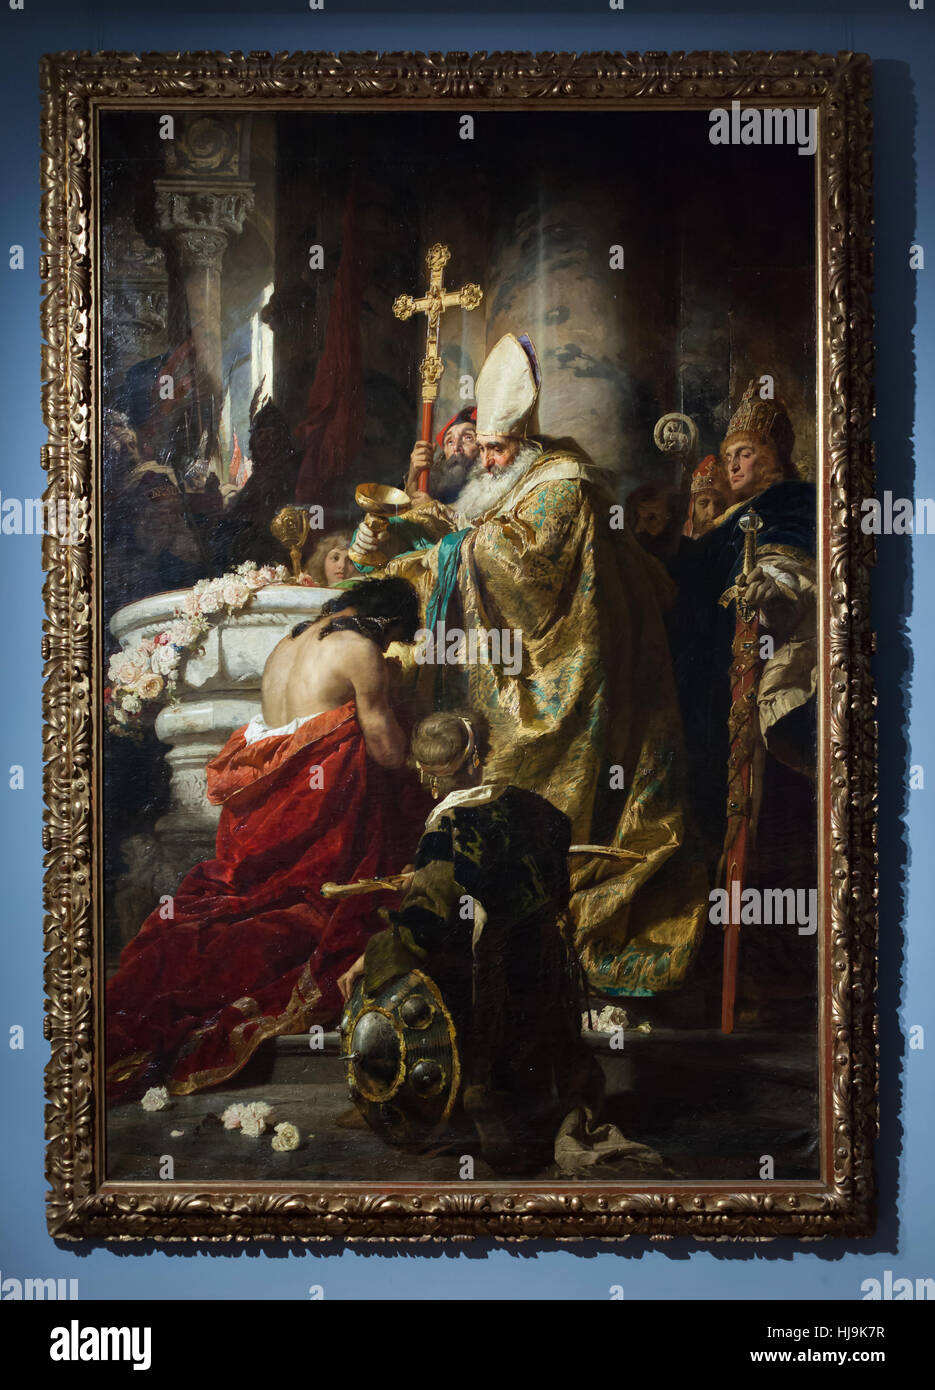 Painting The Baptism of Vajk (1875) by Hungarian painter Gyula Benczur on display in the Hungarian National Gallery (Magyar Nemzeti Galeria) in Budapest, Hungary. Vajk in the future king Stephen I of Hungary, also known as King Saint Stephen (Szent Istvan). Stock Photo